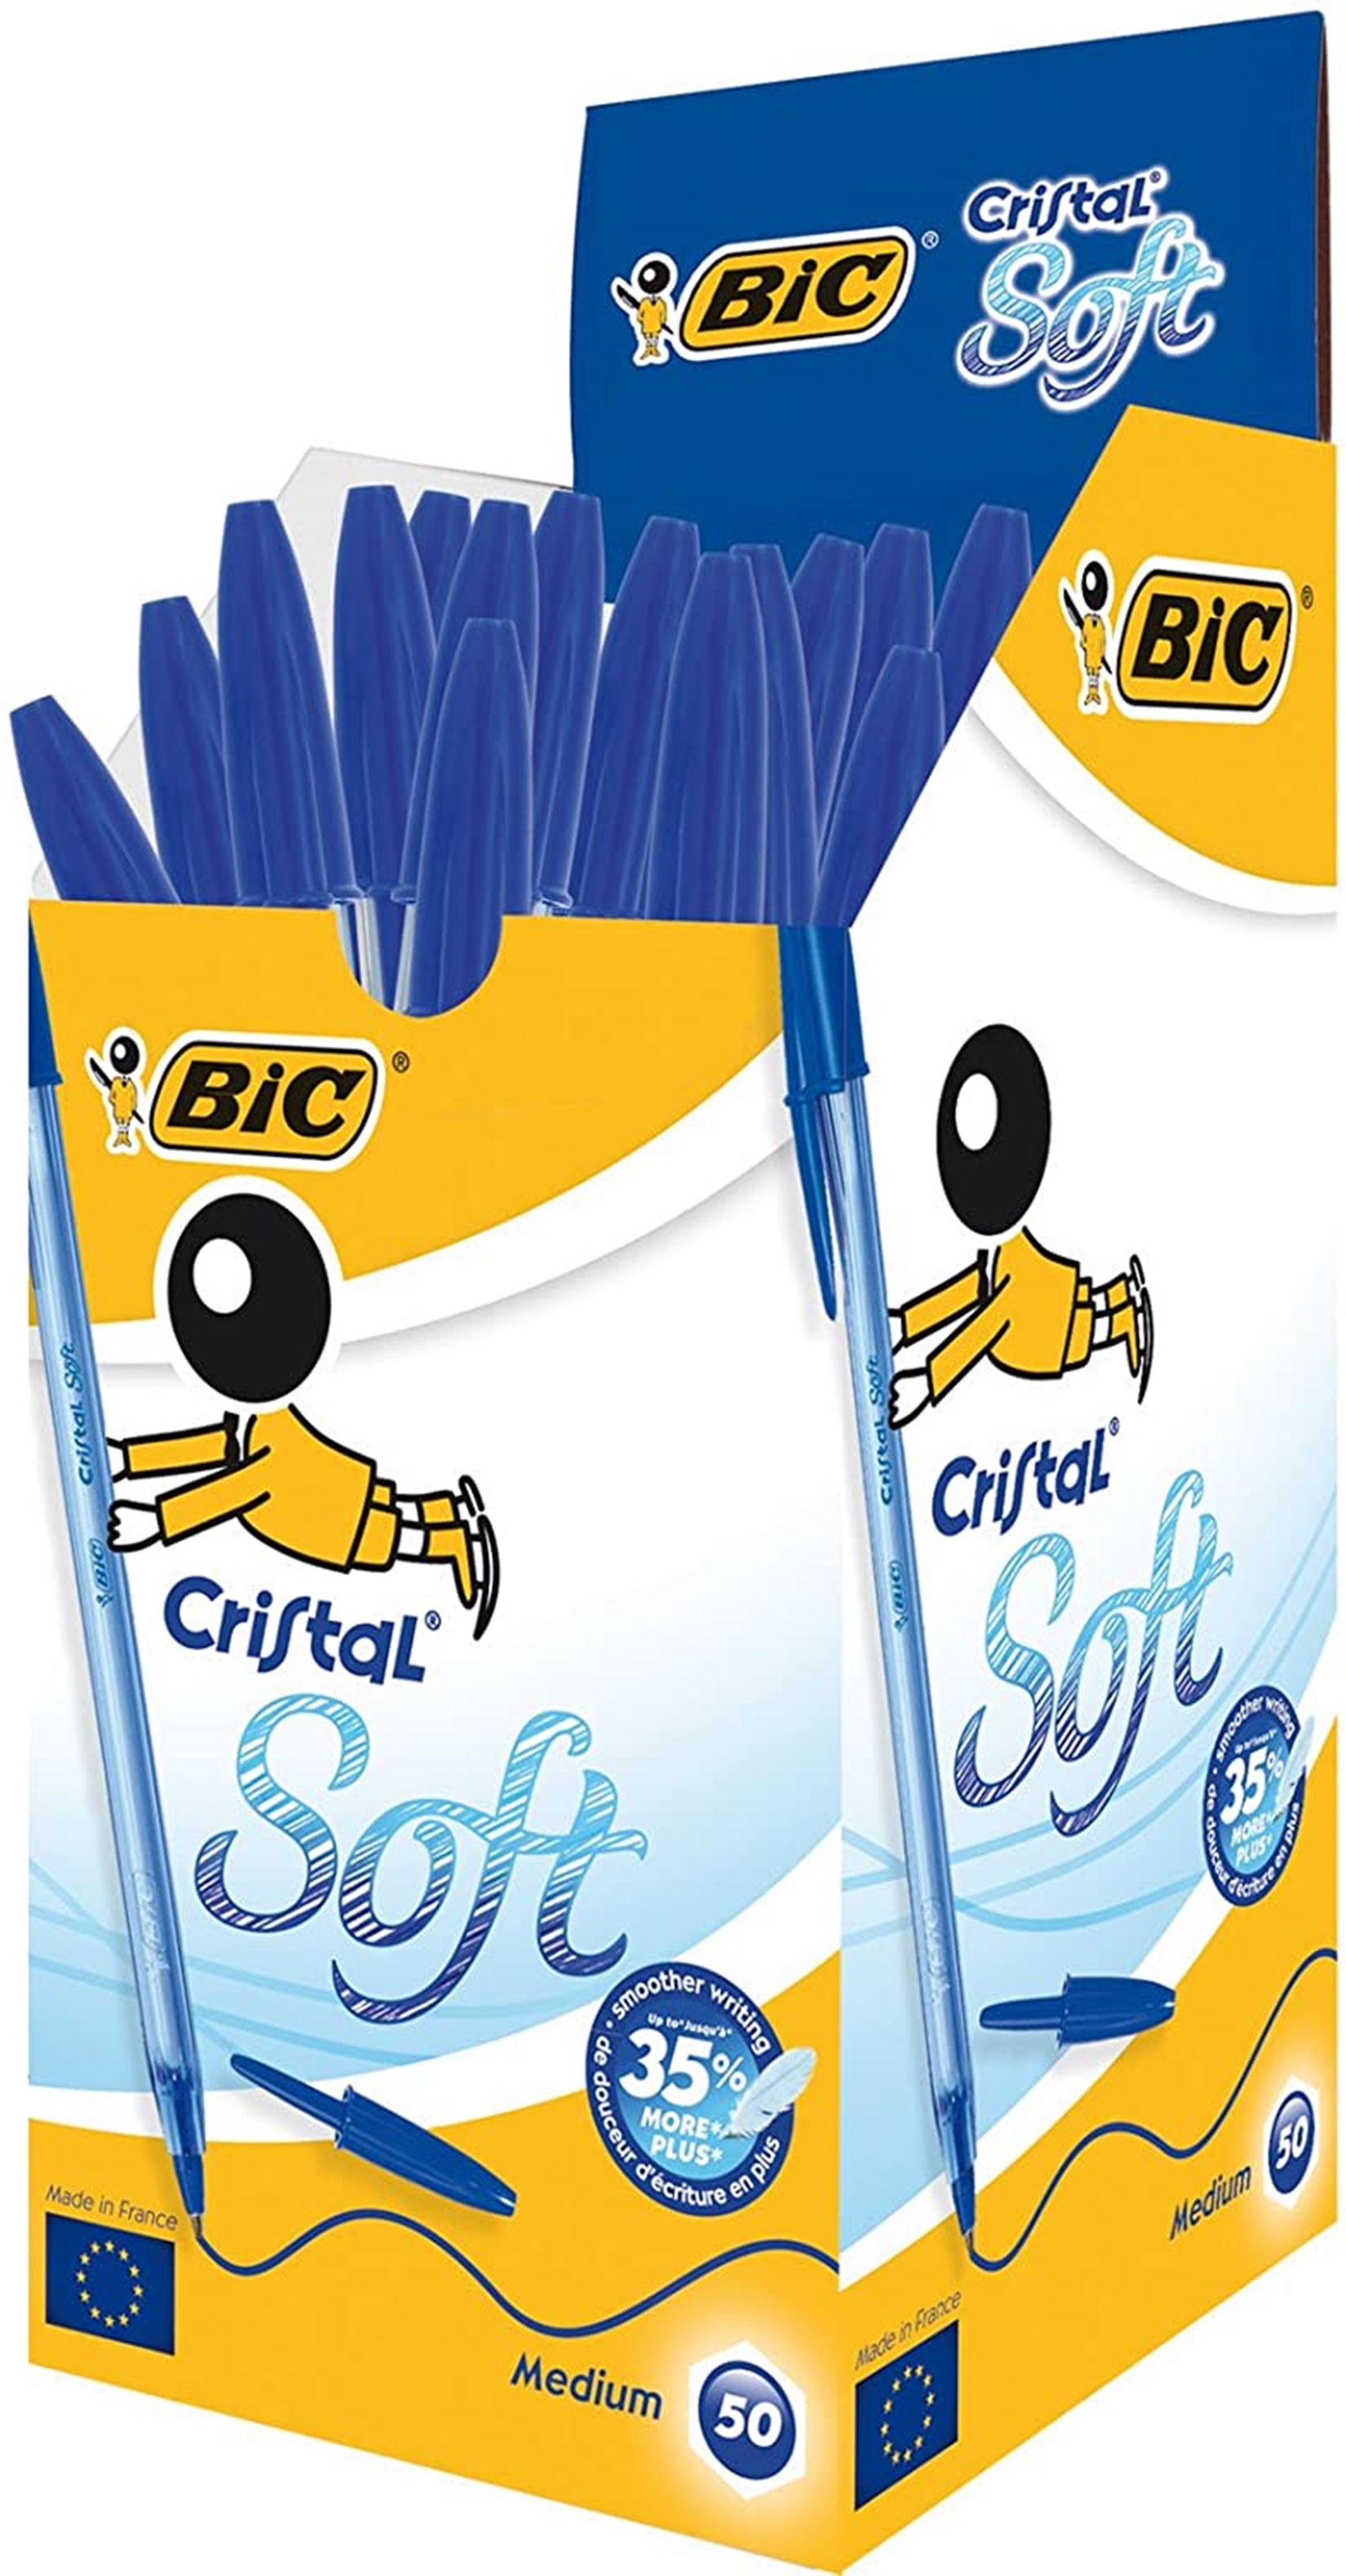 BIC CRISTAL SOFT BALL PEN BLUE INK COLOR SMOOTHER WRITING PACK OF 4 PENS